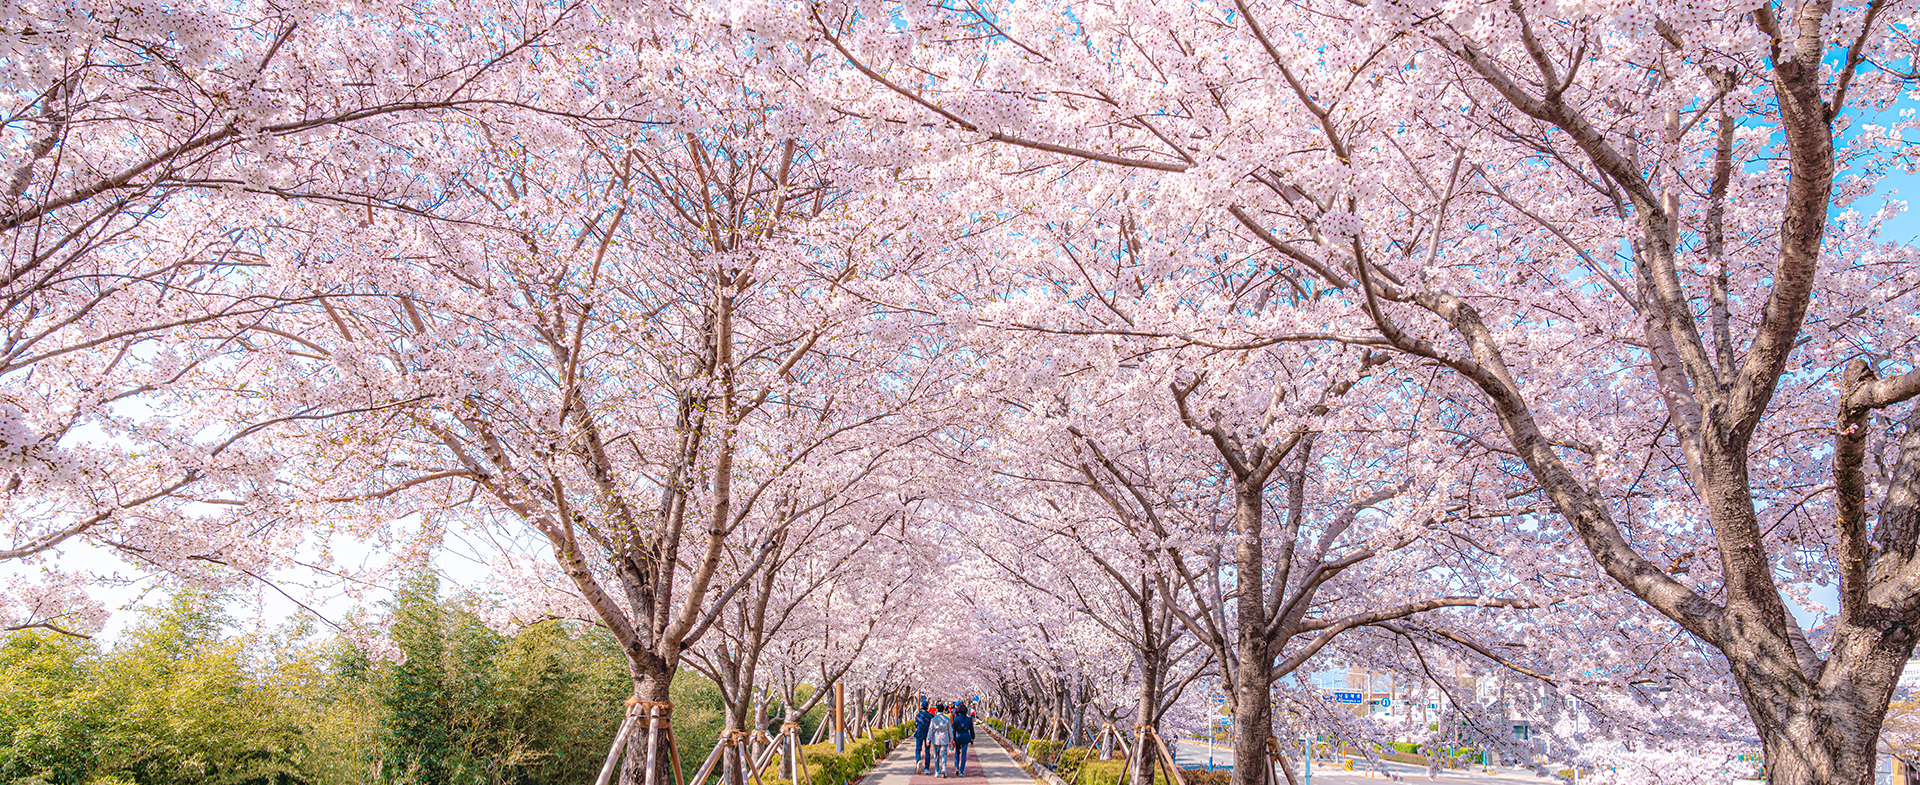 Busan is awash with cherry blossoms ~✿